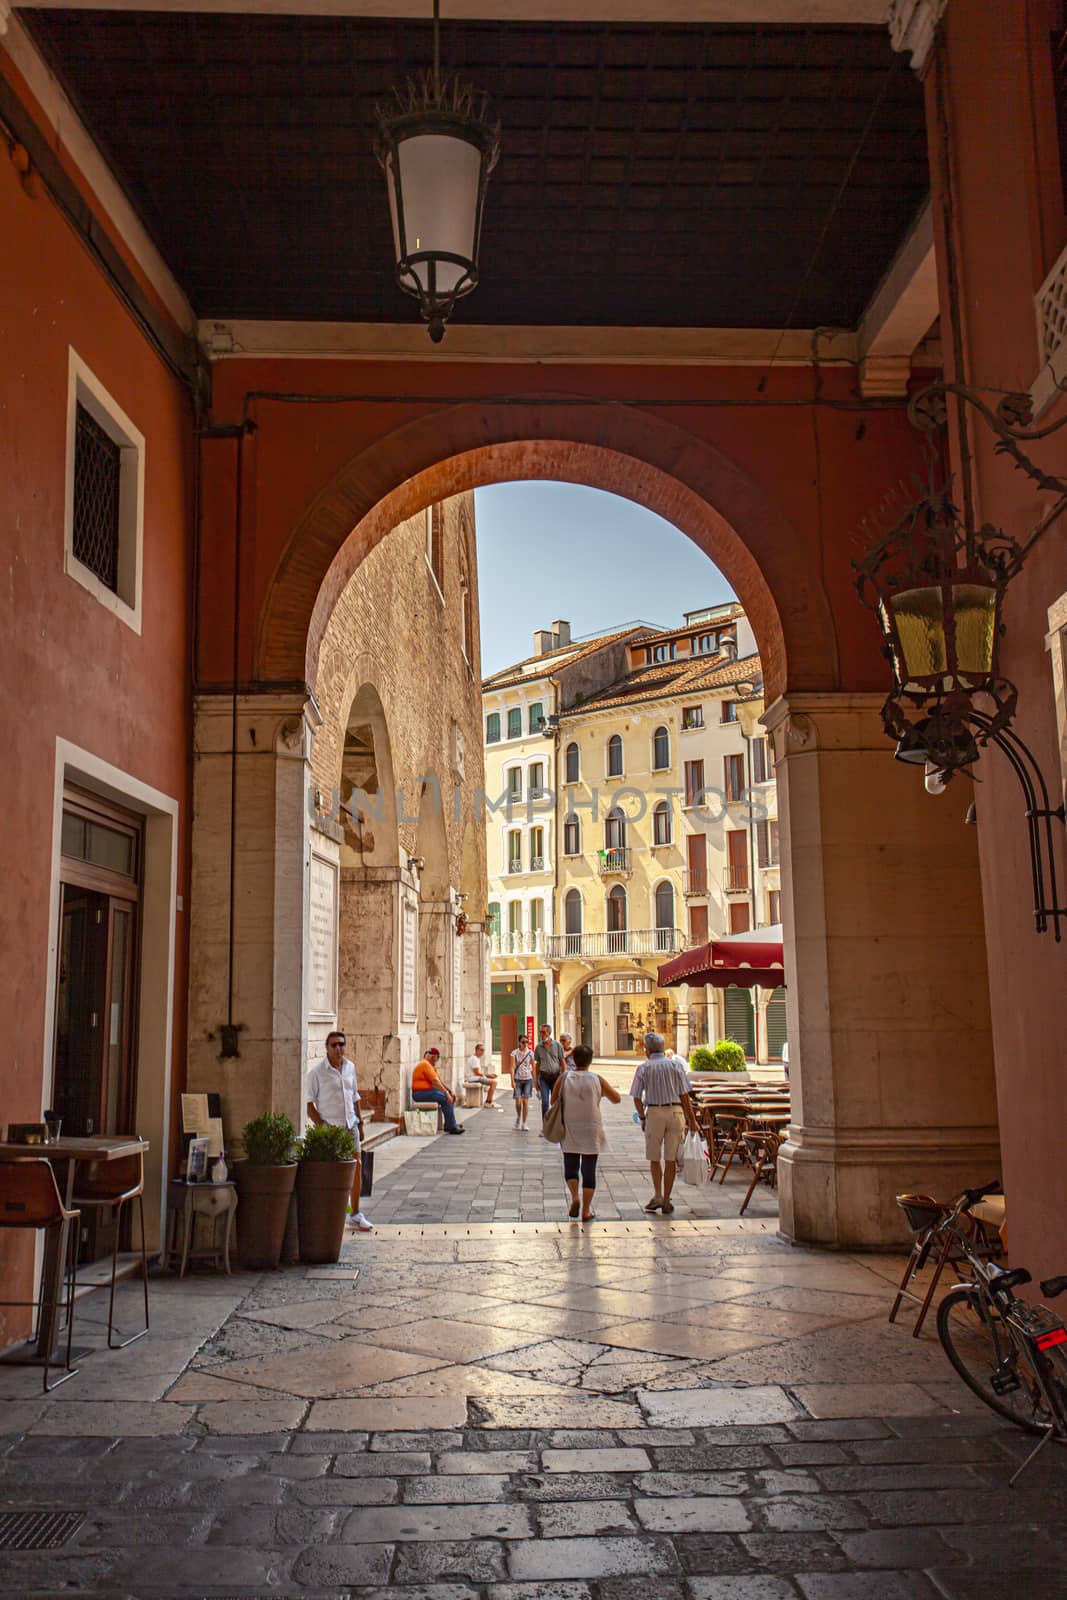 Arcades in Piazza dei signori in Treviso with people passing through 2 by pippocarlot